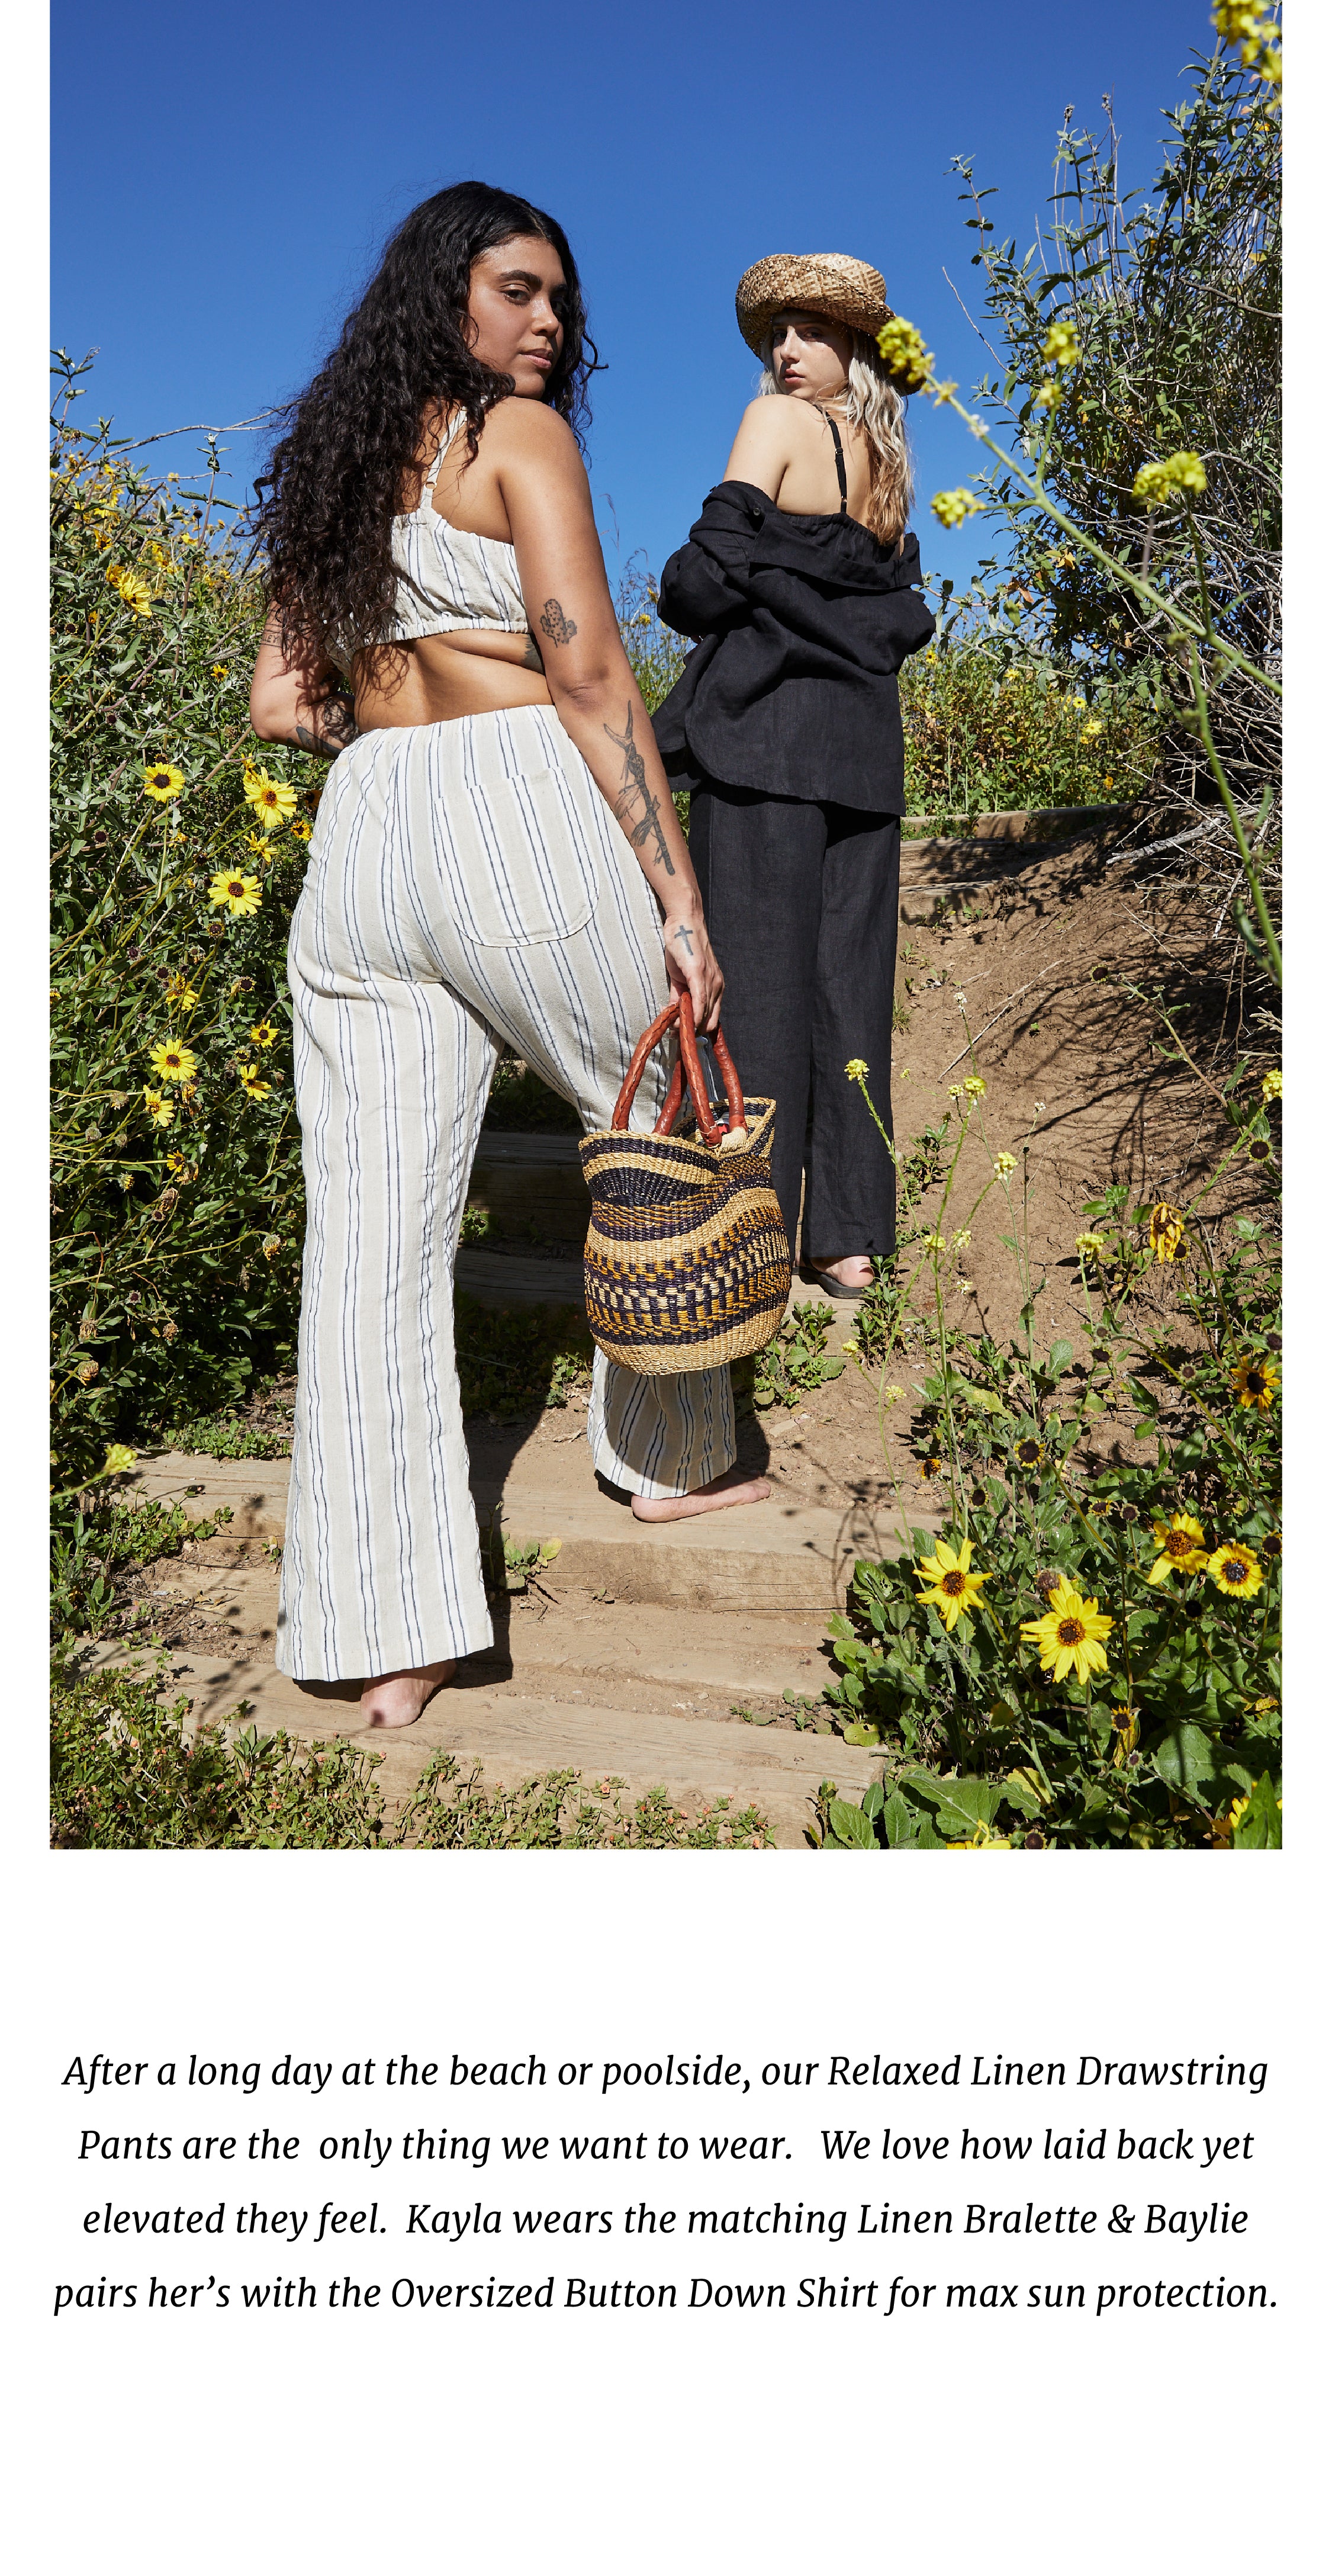 After a long day at the beach or poolside, our Relaxed Linen Drawstring Pants are the  only thing we want to wear.   We love how laid back yet elevated they feel.  Kayla wears the matching Linen Bralette & Baylie pairs her’s with the Oversized Button Down Shirt for max sun protection.